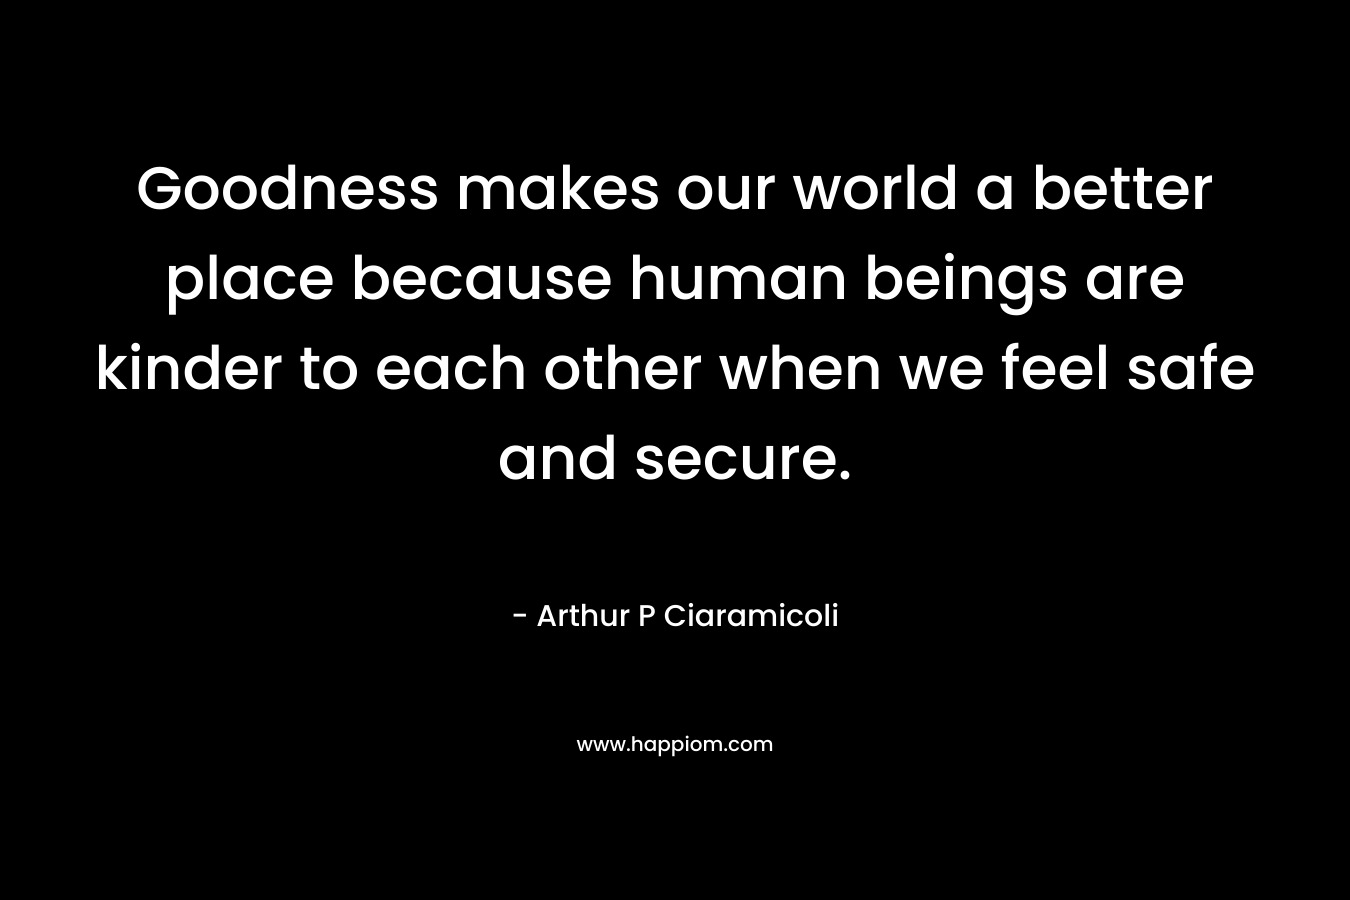 Goodness makes our world a better place because human beings are kinder to each other when we feel safe and secure.